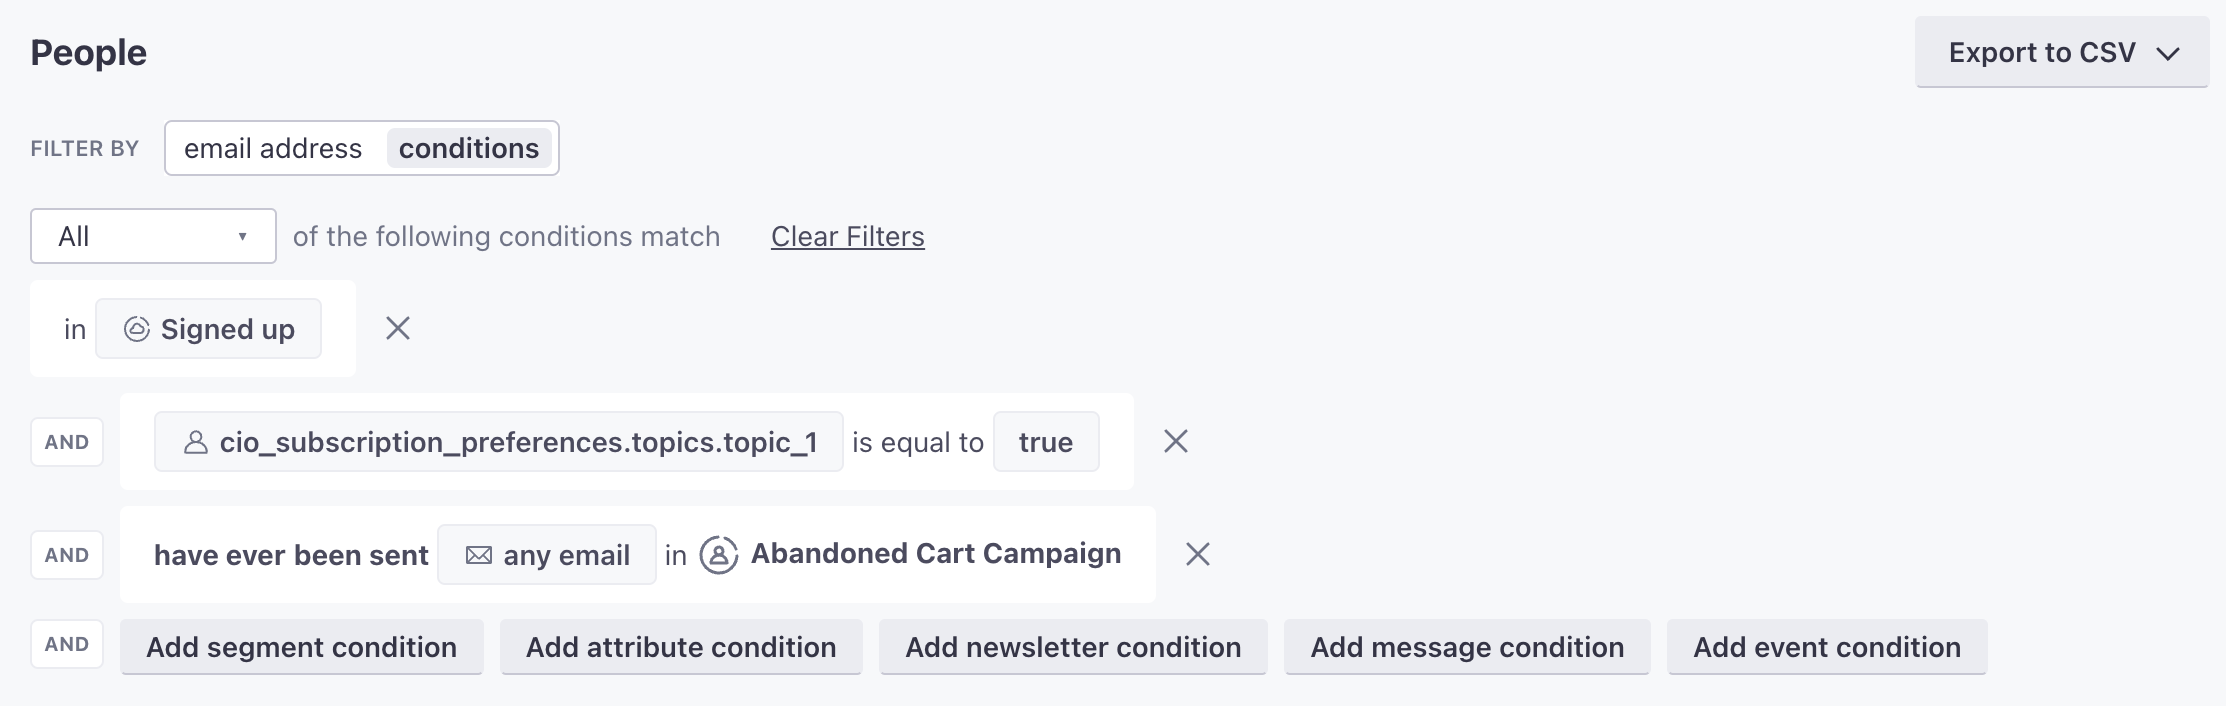 Three conditions filter the page. Only people appear in the segment Signed Up, whose subscription preference for topic 1 is true, and who have ever been sent an email in the Abandoned cart campaign.